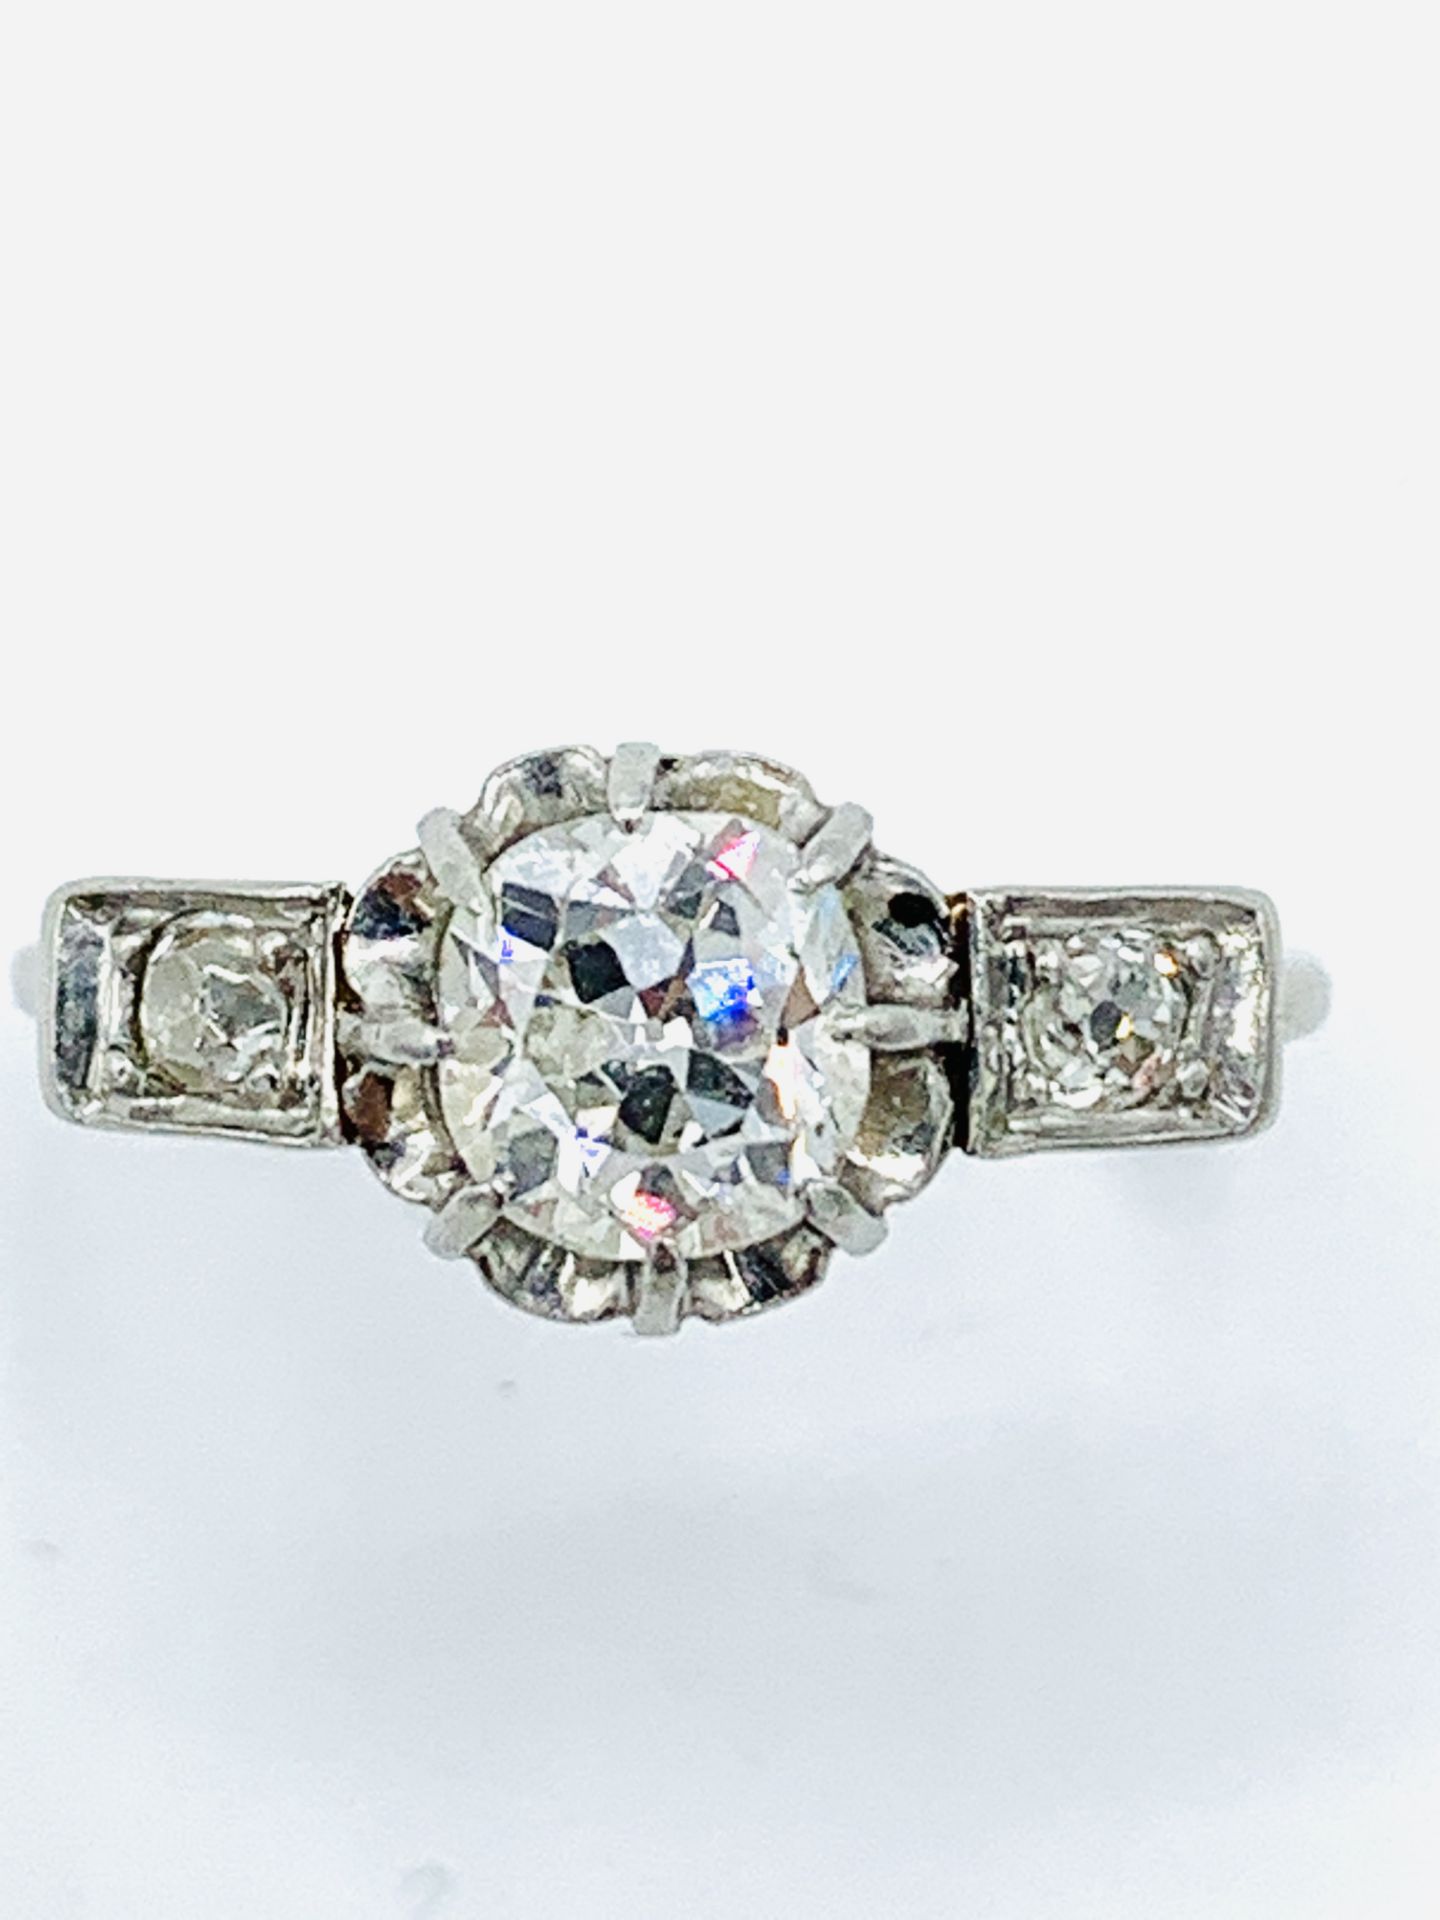 18ct white gold single stone diamond ring with diamond shoulders - Image 3 of 8